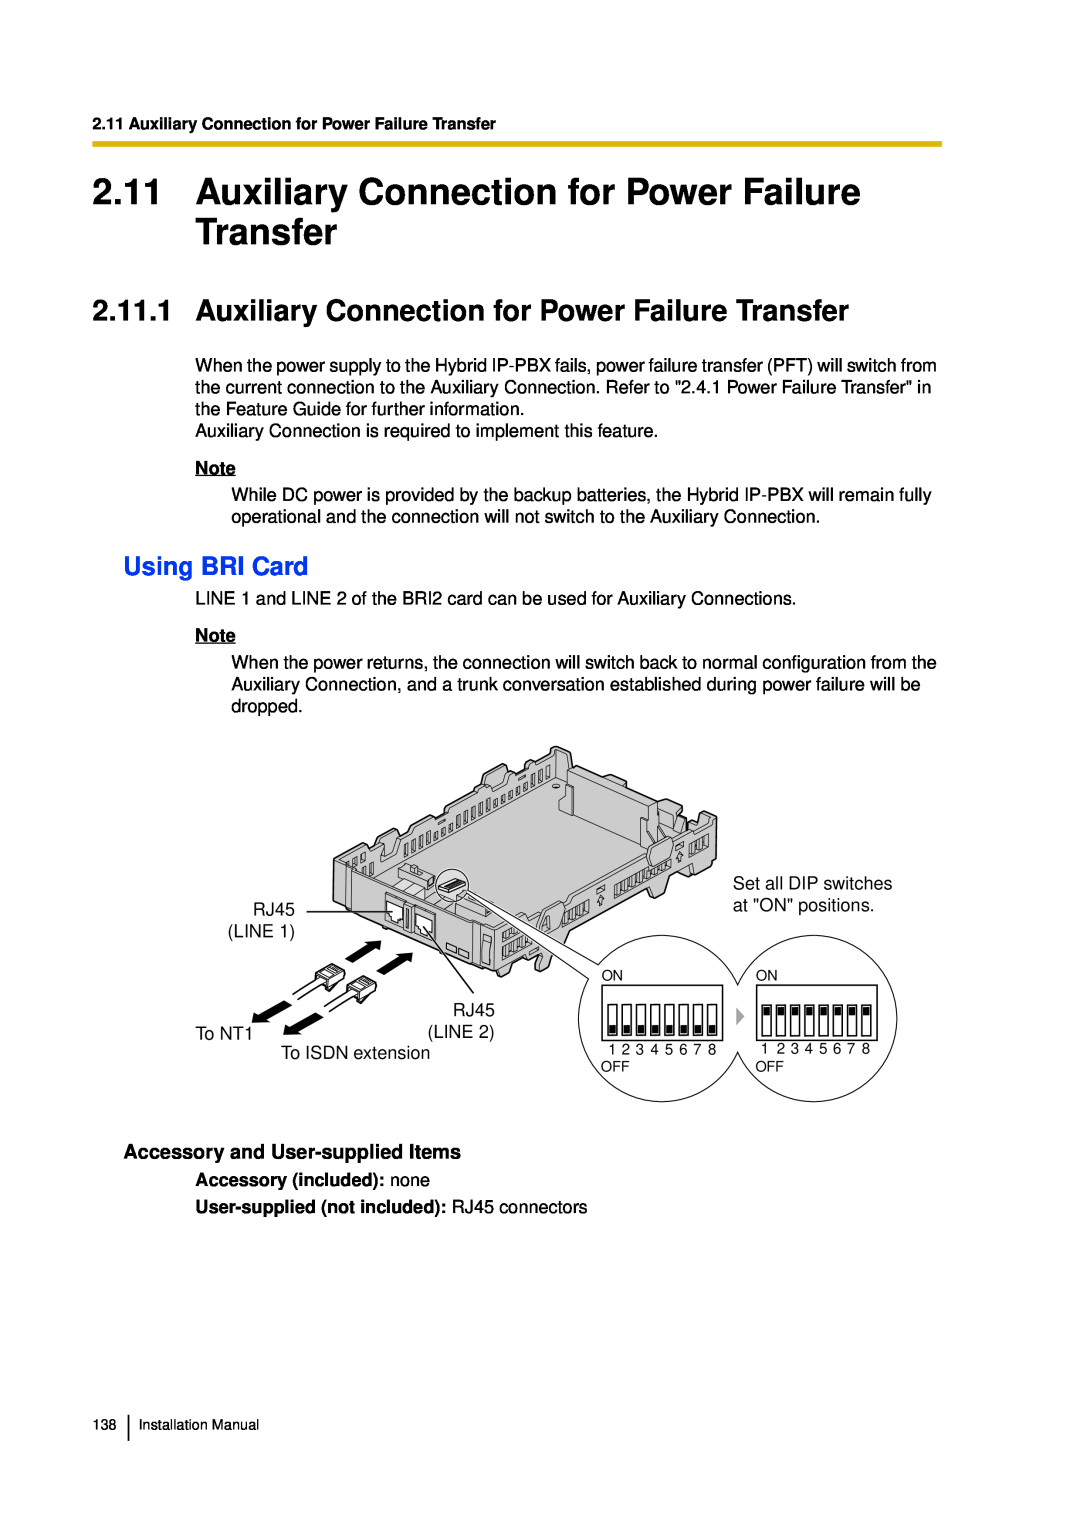 Panasonic KX-TDA30 installation manual Using BRI Card, Accessory included none, User-suppliednot included RJ45 connectors 